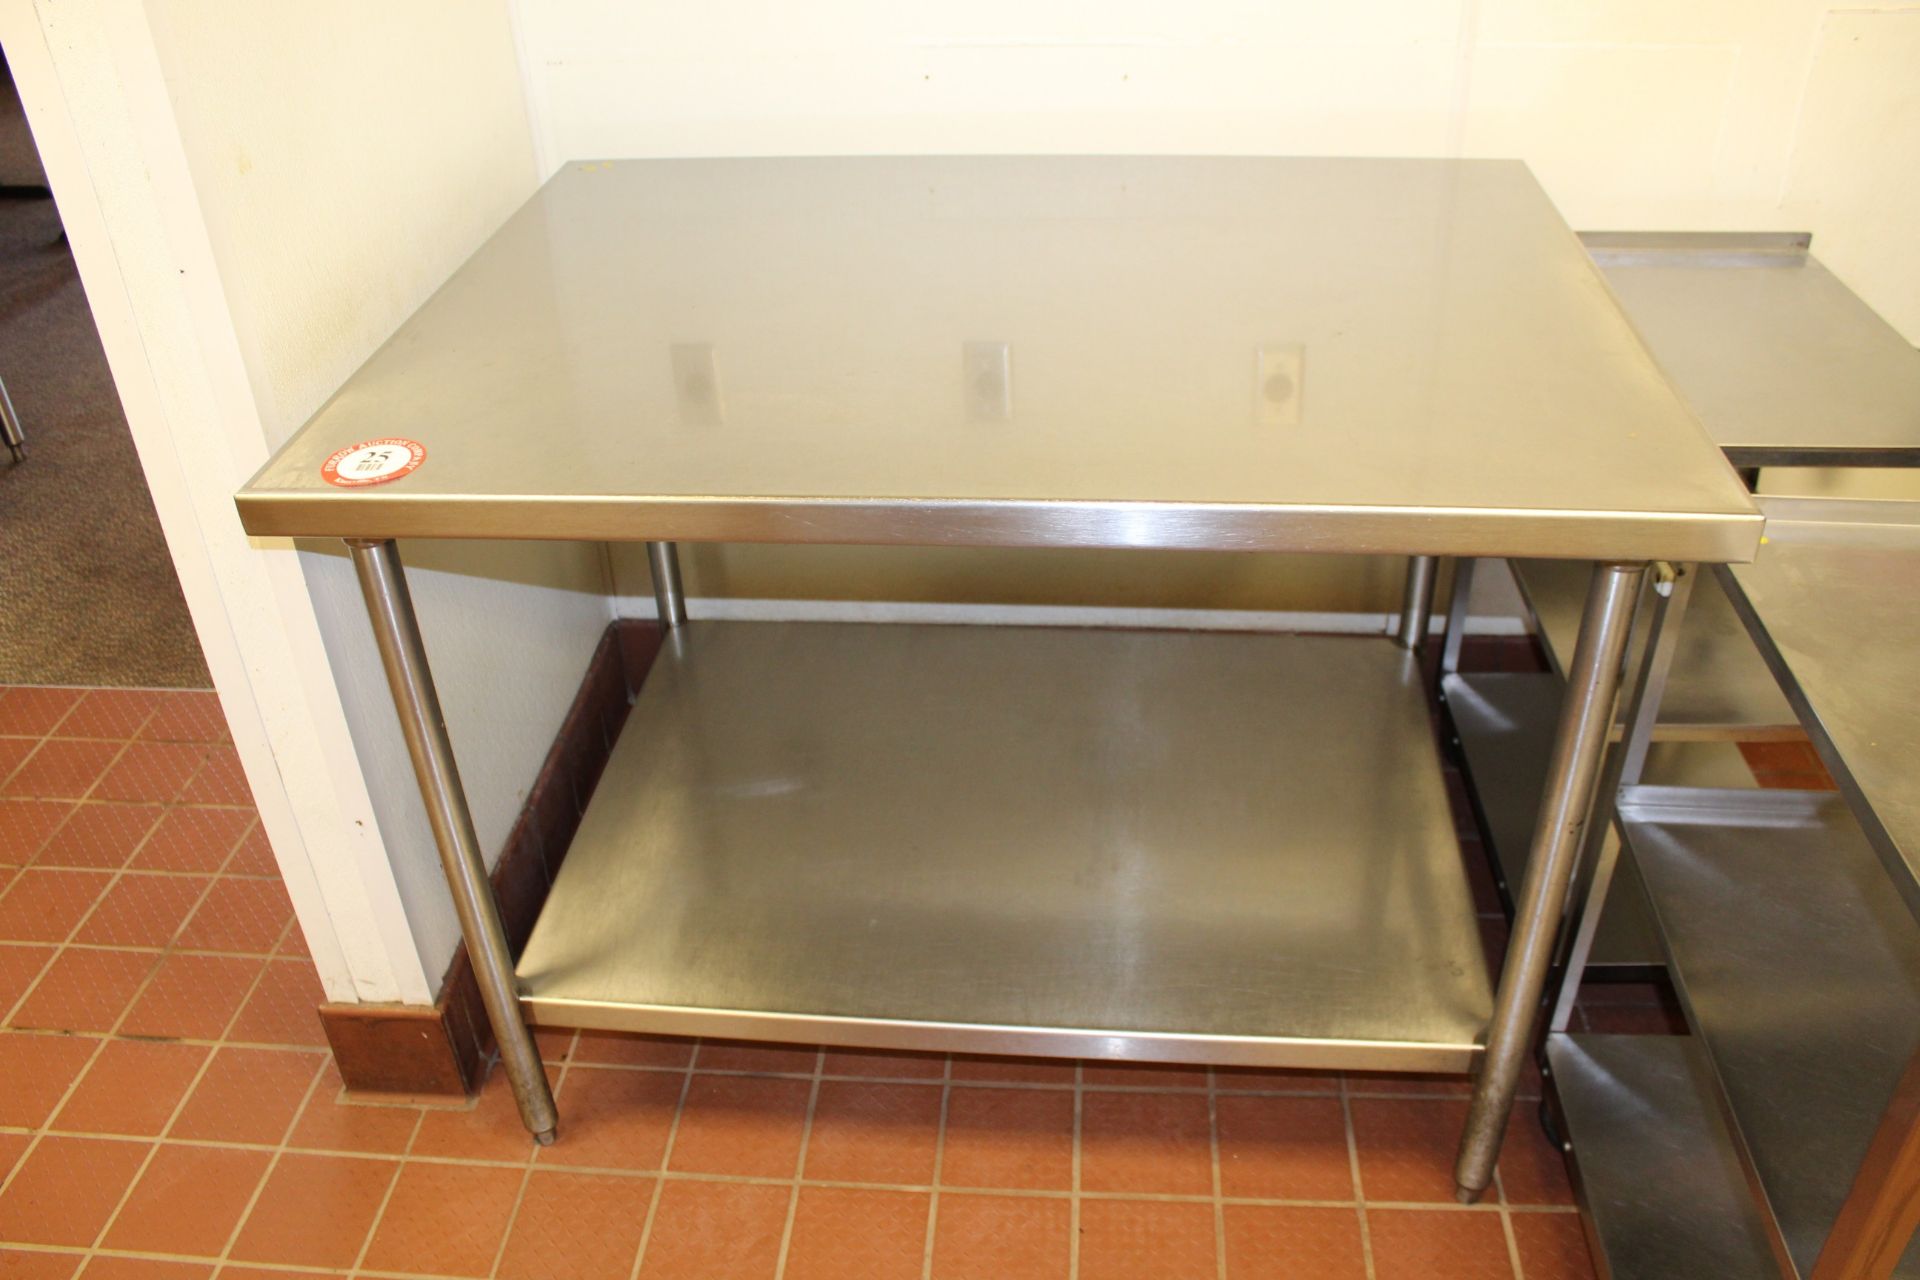 Stainless Steel Table 48" x 36"